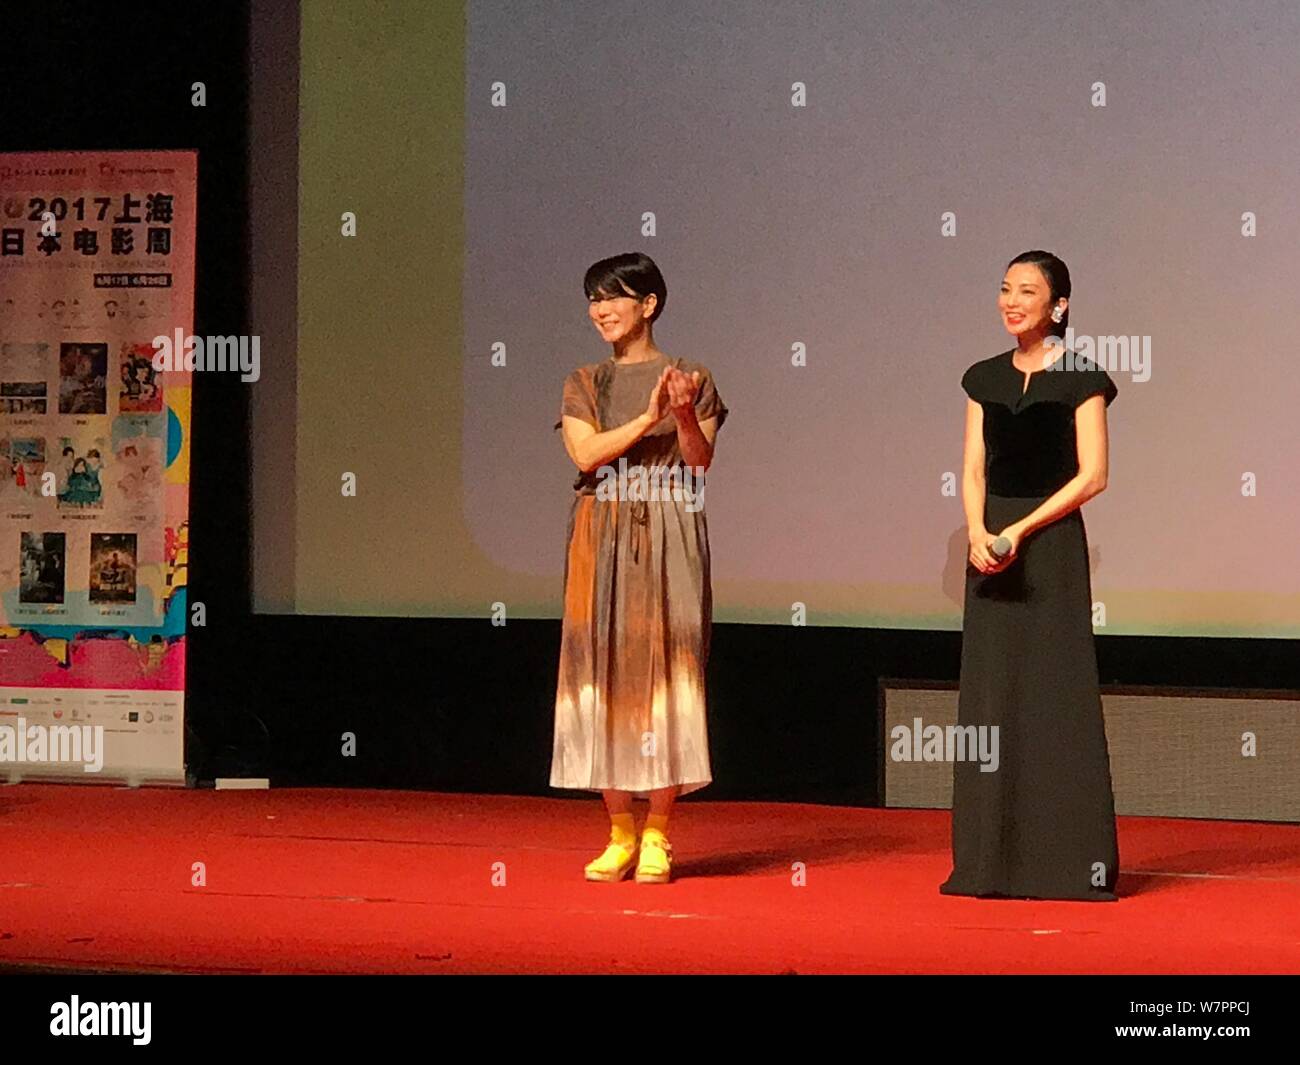 Japanese director Yukiko Mishima, left, and actress Rena Tanaka attend the opening ceremony of the Japan Film Week during the 20th Shanghai Internatio Stock Photo